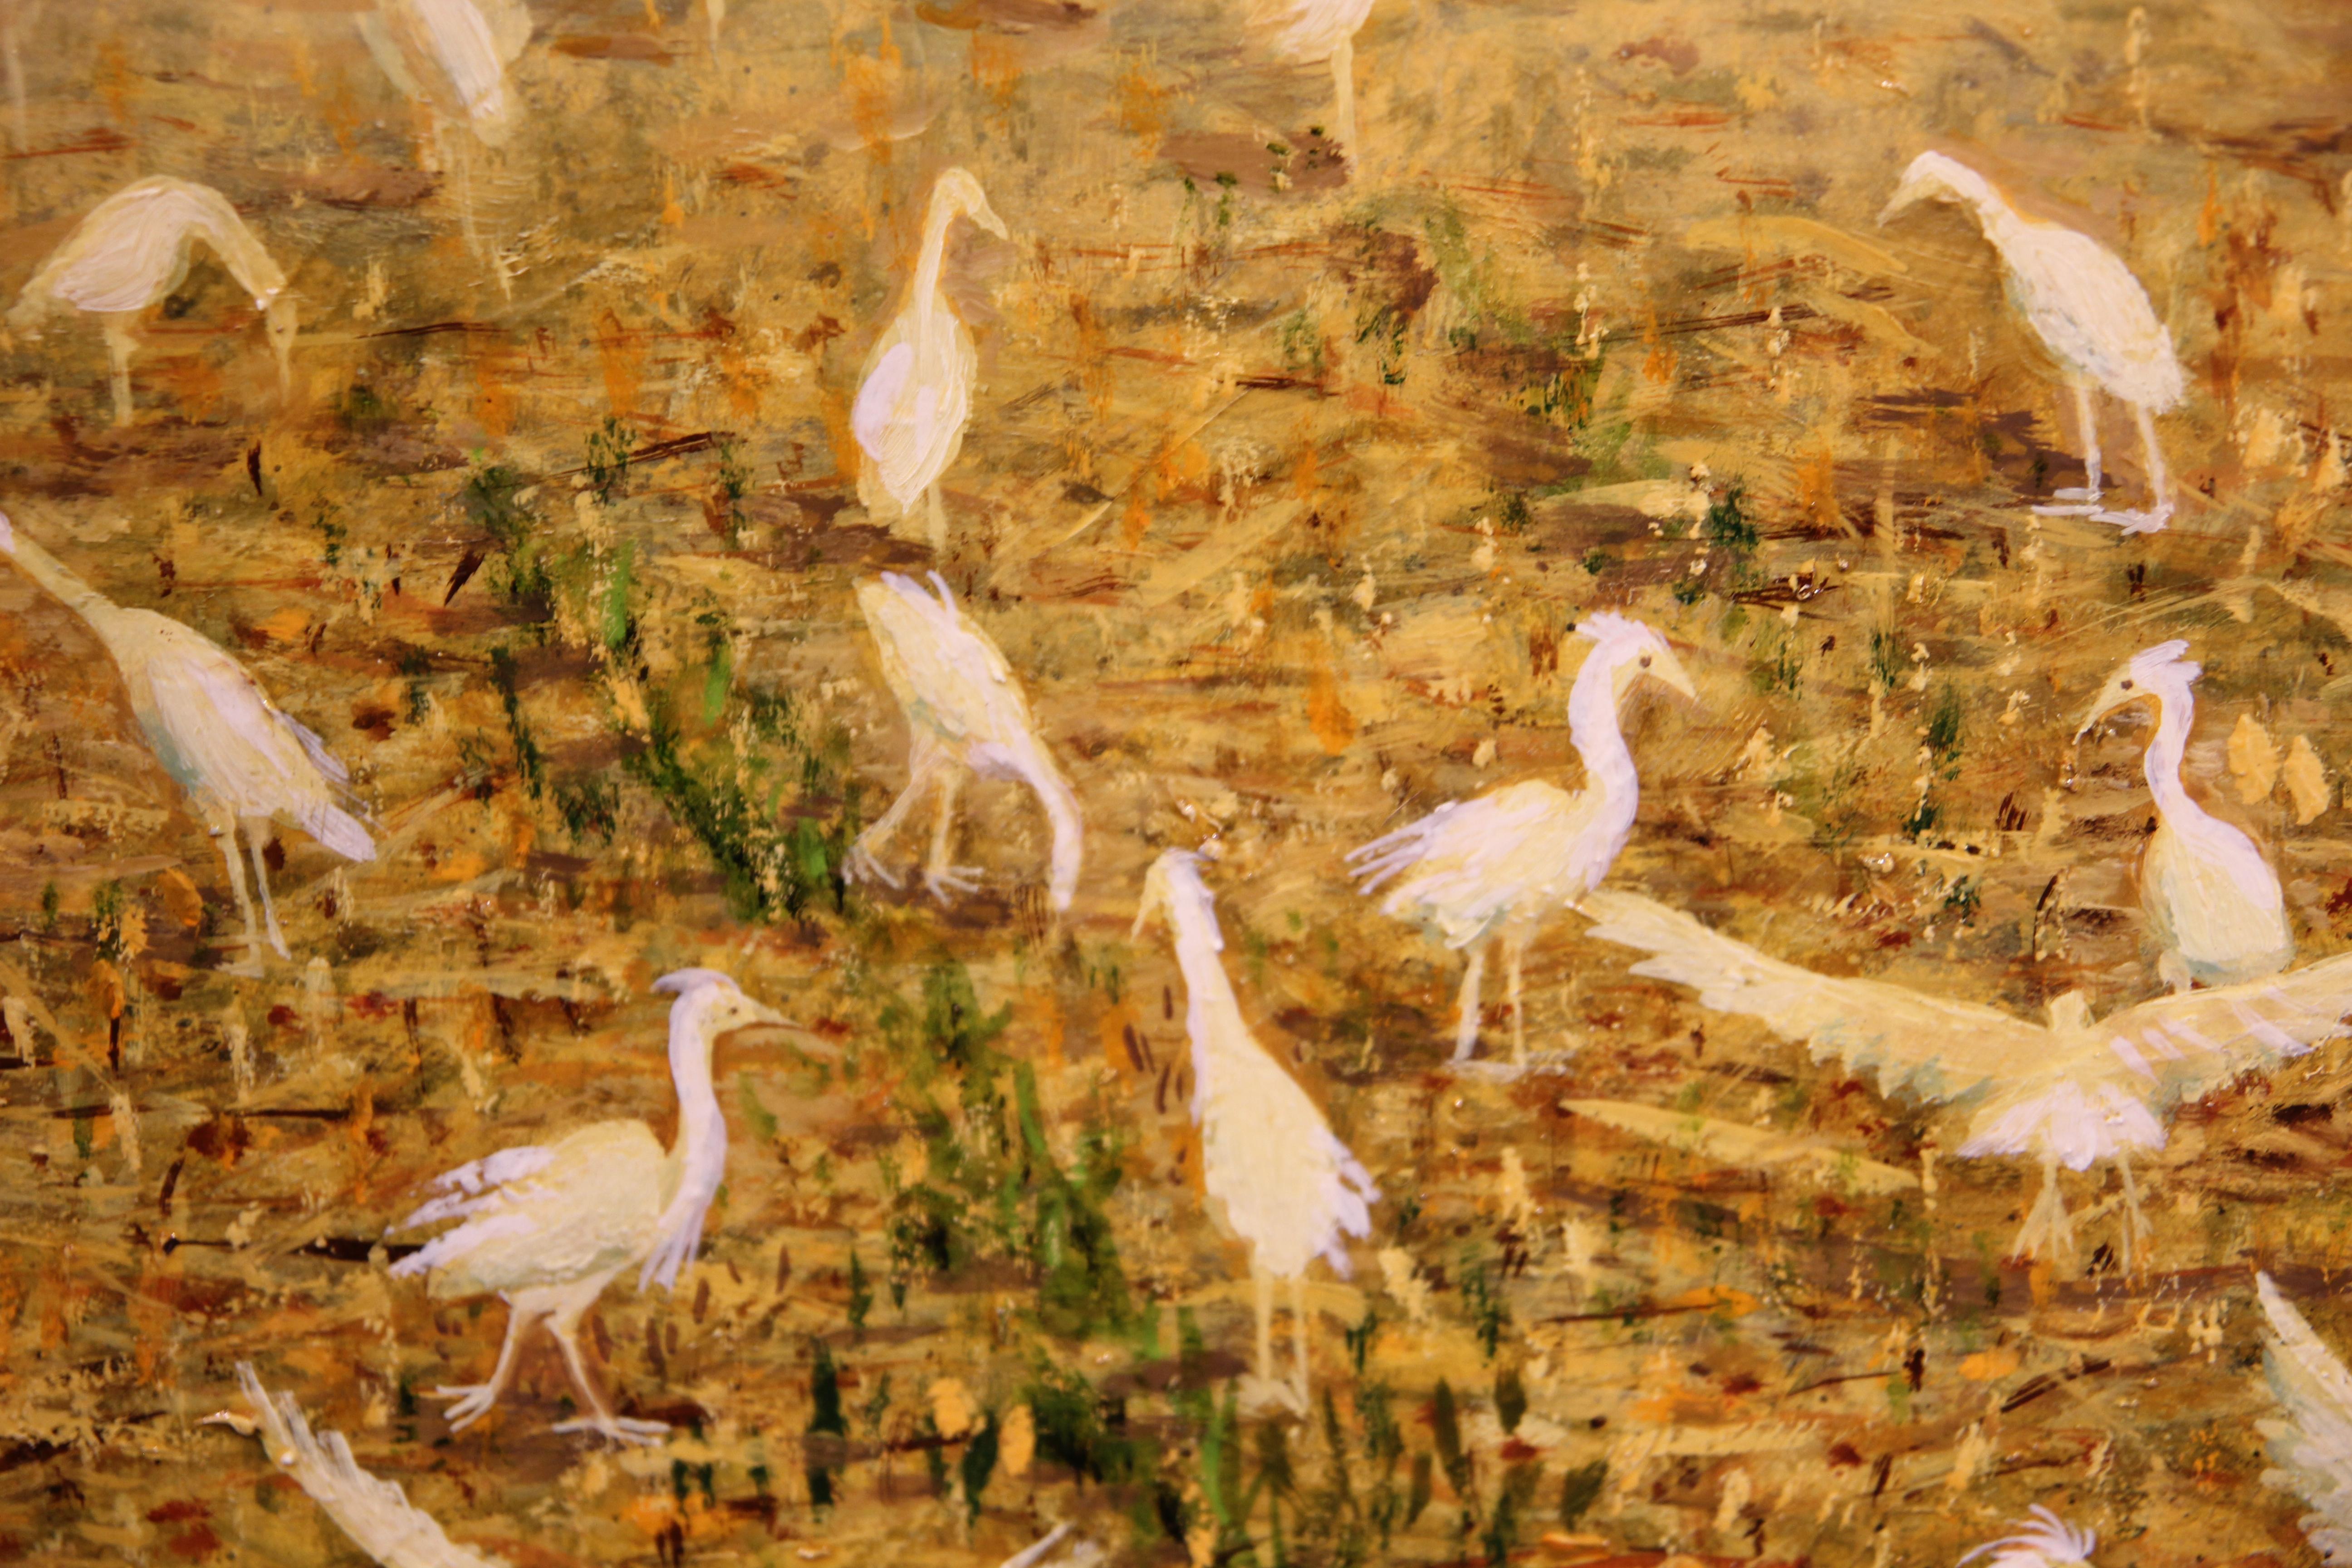 Naturalistic Pastoral Country Scene of Tractor & White Cattle Egrets in a Field - Painting by W. R. Stevenson